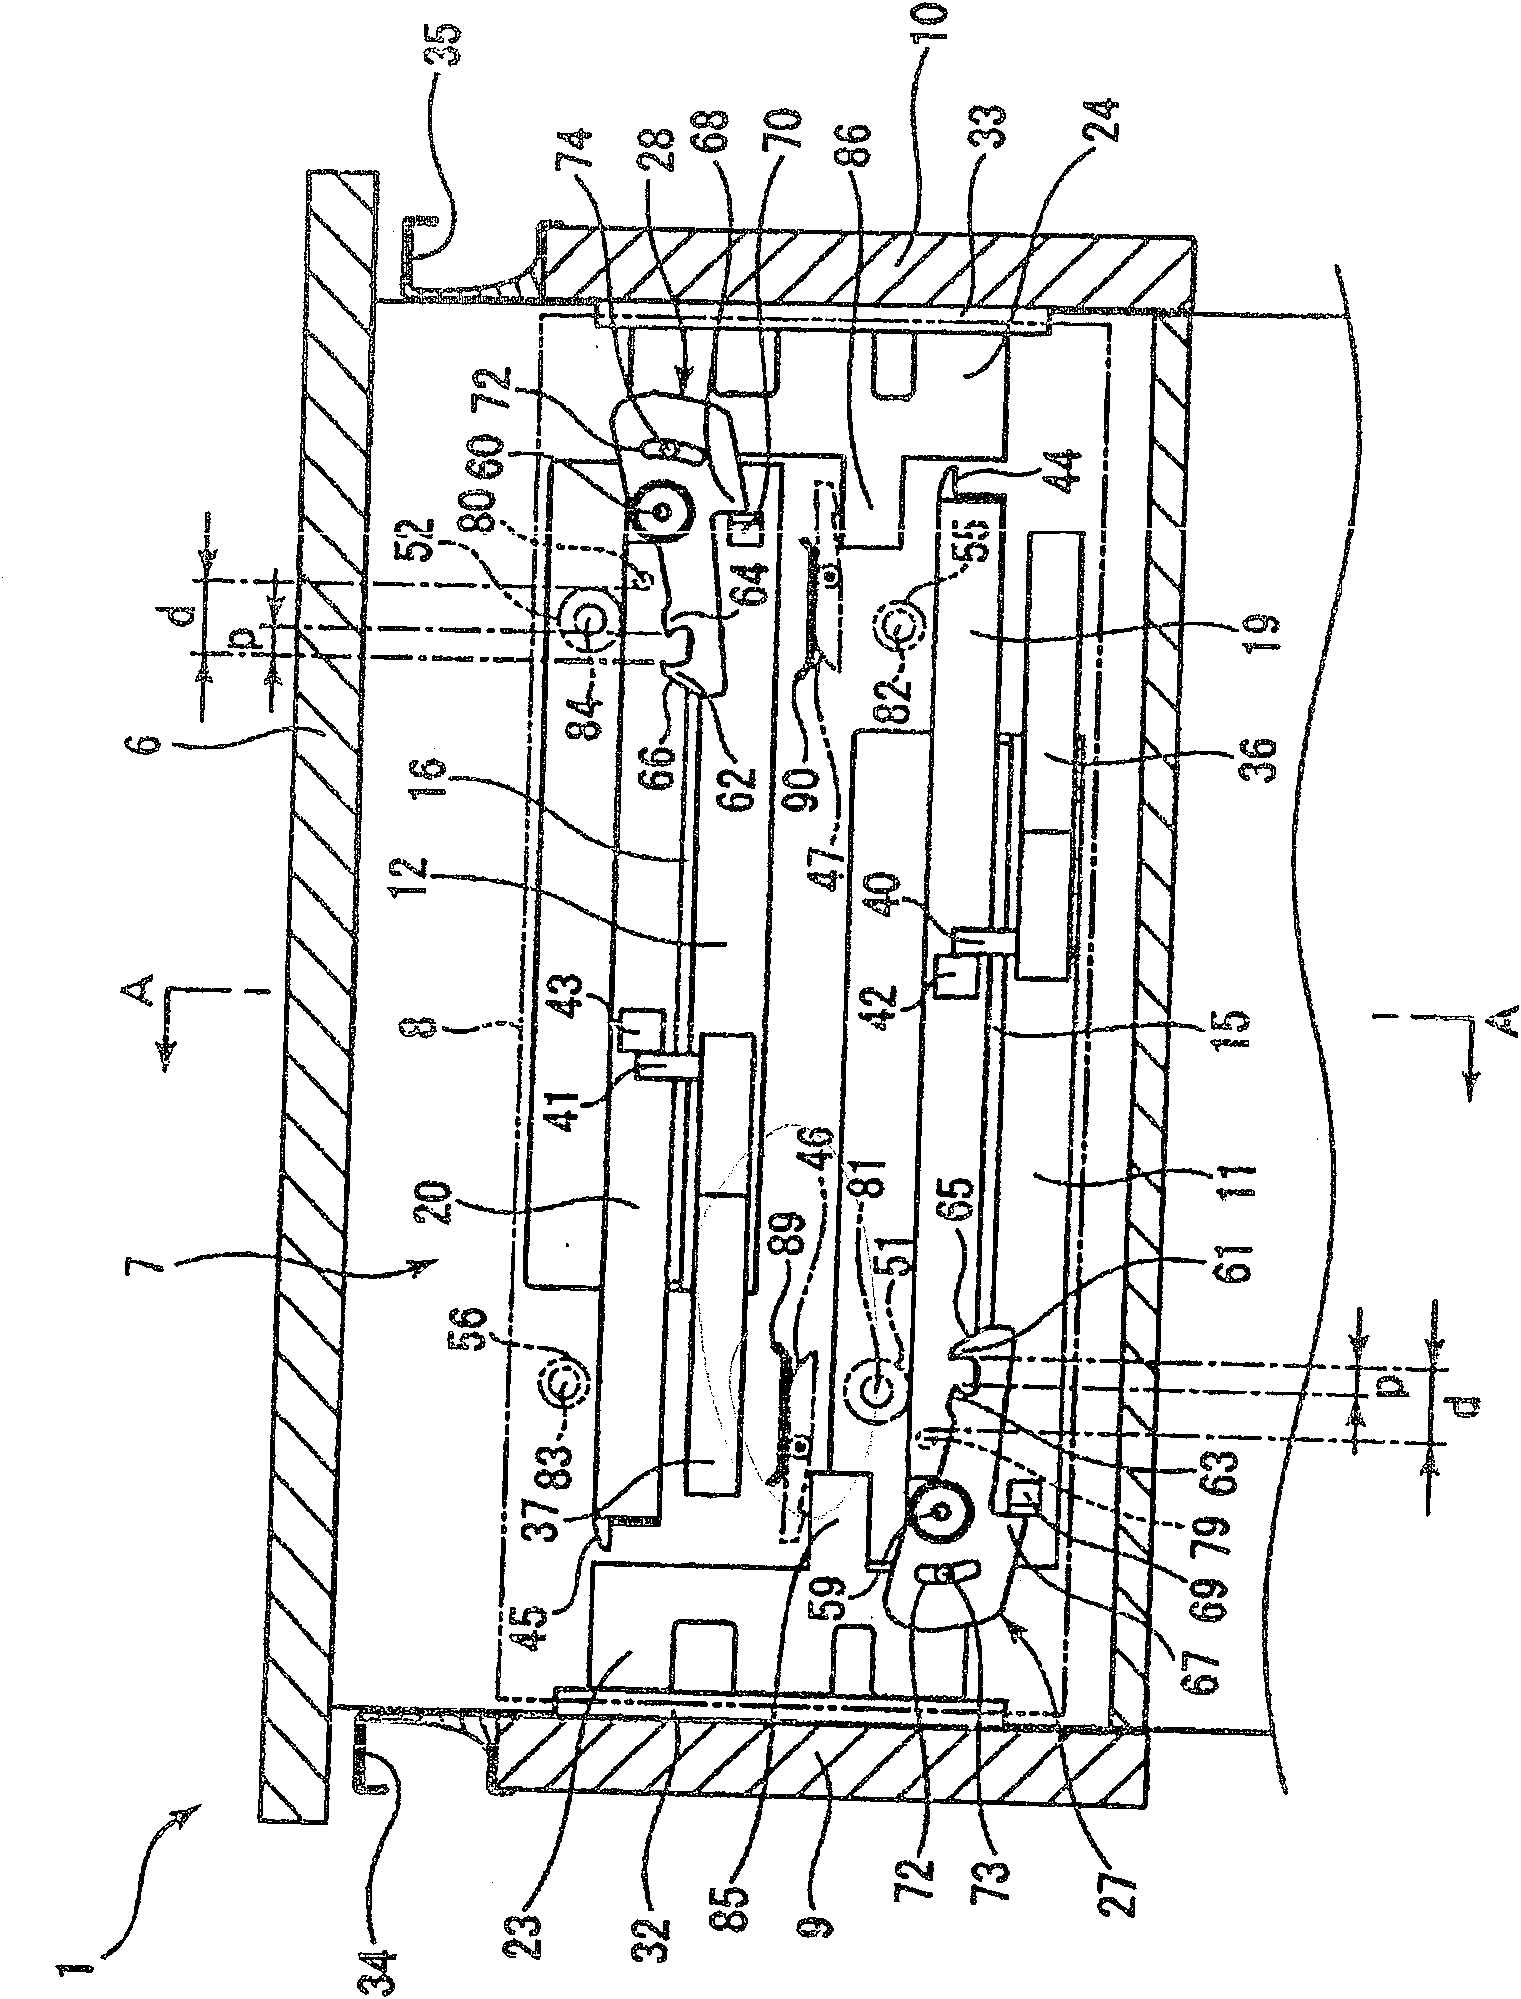 Structure of dual directional drawer and kitchen stand having the same